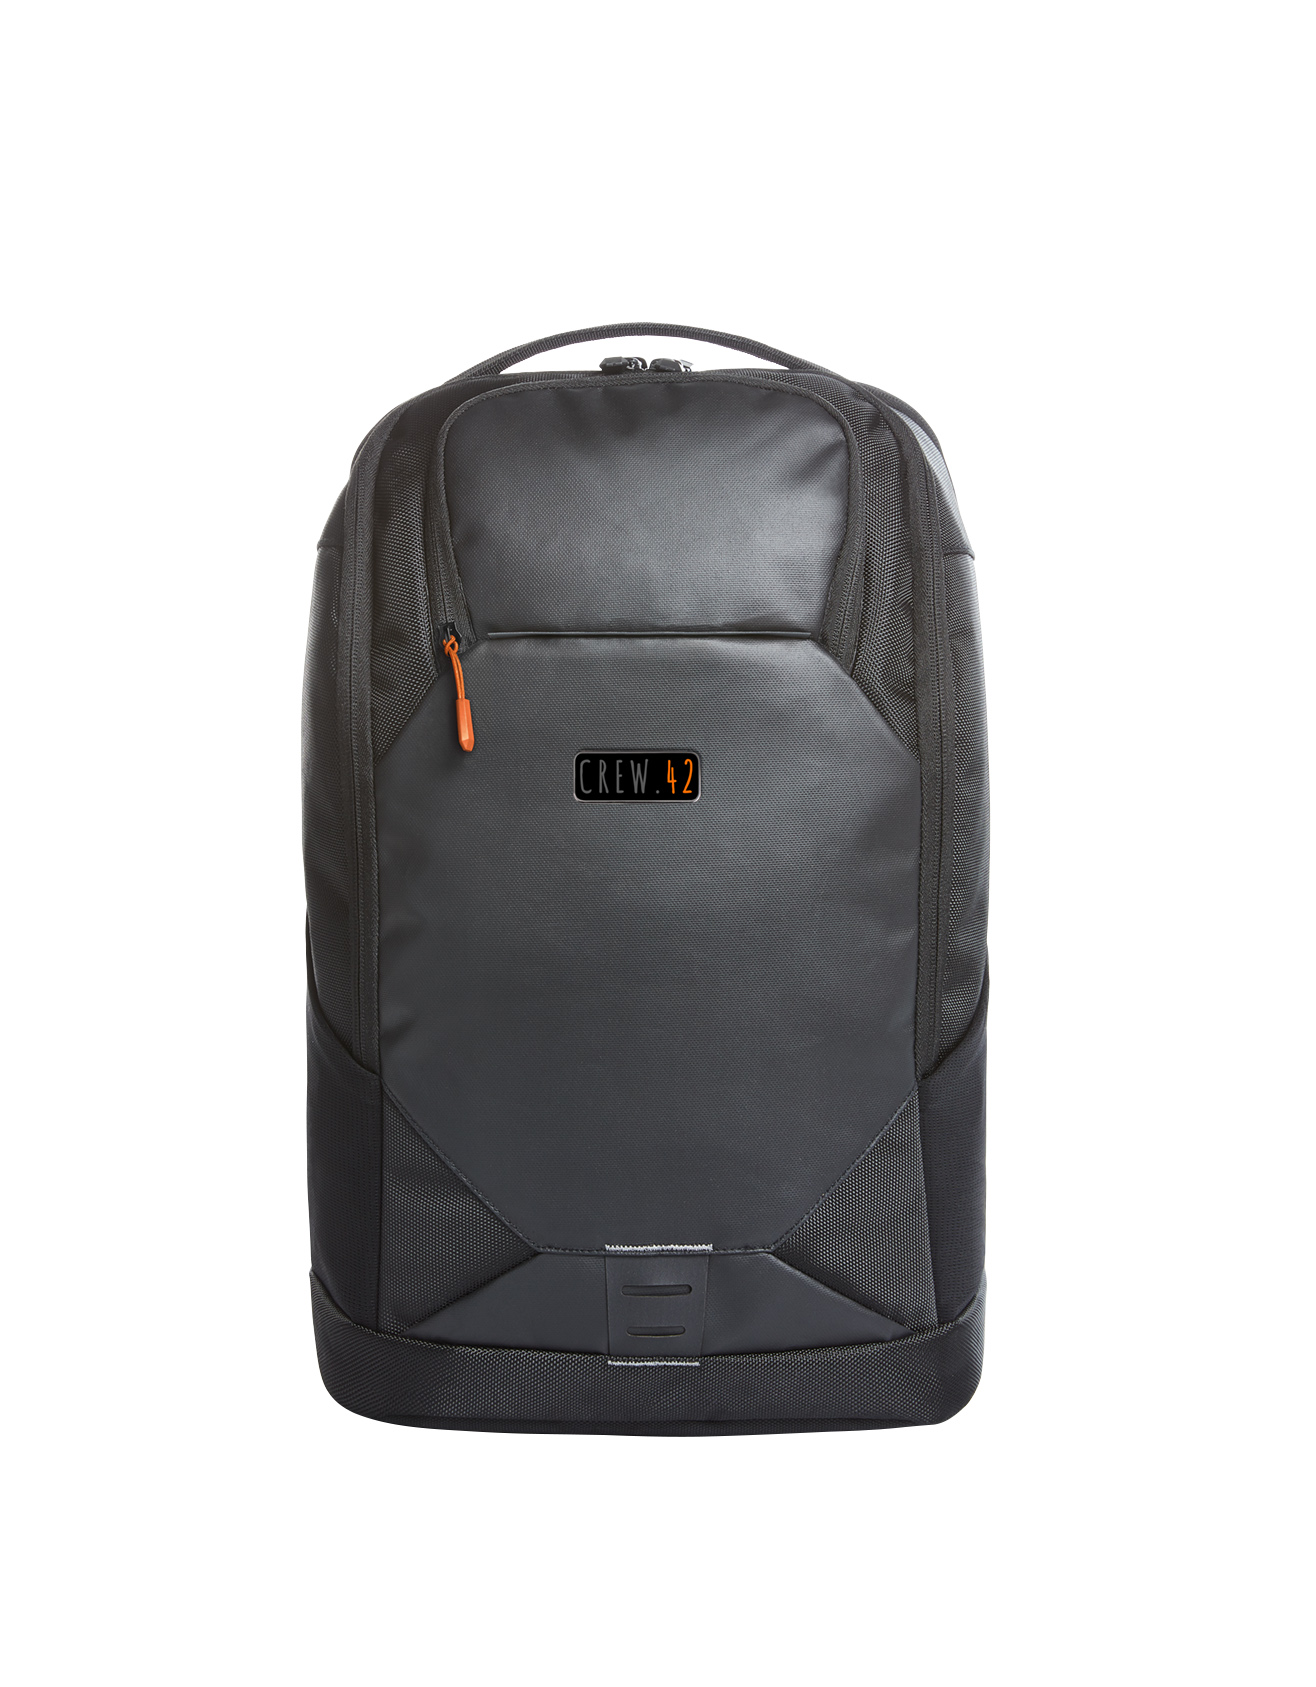 notebook backpack HASHTAG